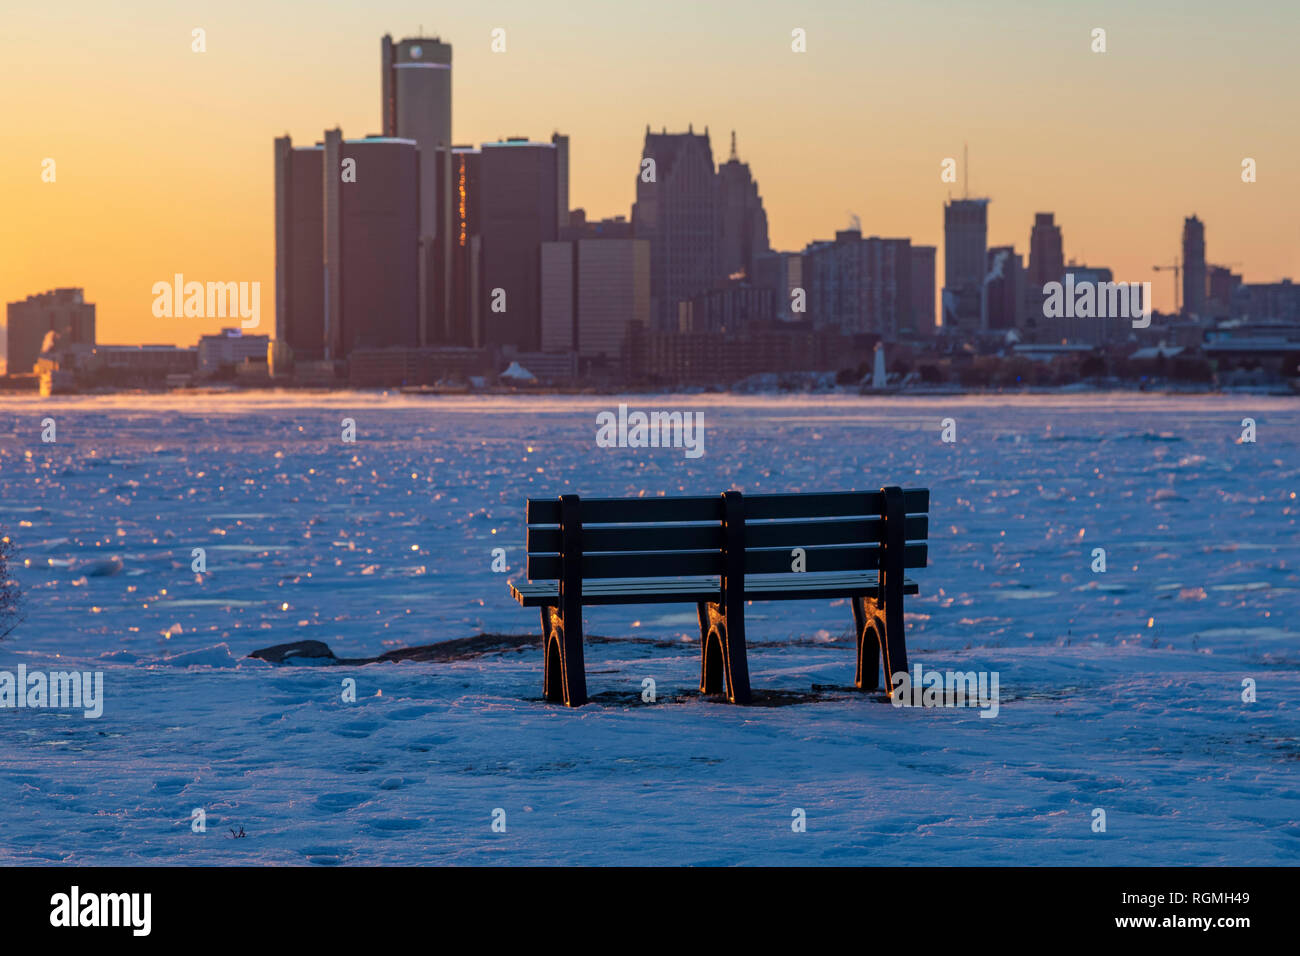 Detroit, Michigan USA - 30 January 2019 - There was little competition for the bench at the tip of Belle Isle overlooking downtown Detroit as polar cold air swept the U.S. midwest. A low temperature record was broken in Detroit even before the sun set over the ice-choked Detroit River. At sunset, the temperature was -7F (-22C)., with a windchill of -30F (-34C). The overnight low was expected to reach -16F (-27C). Credit: Jim West/Alamy Live News Stock Photo